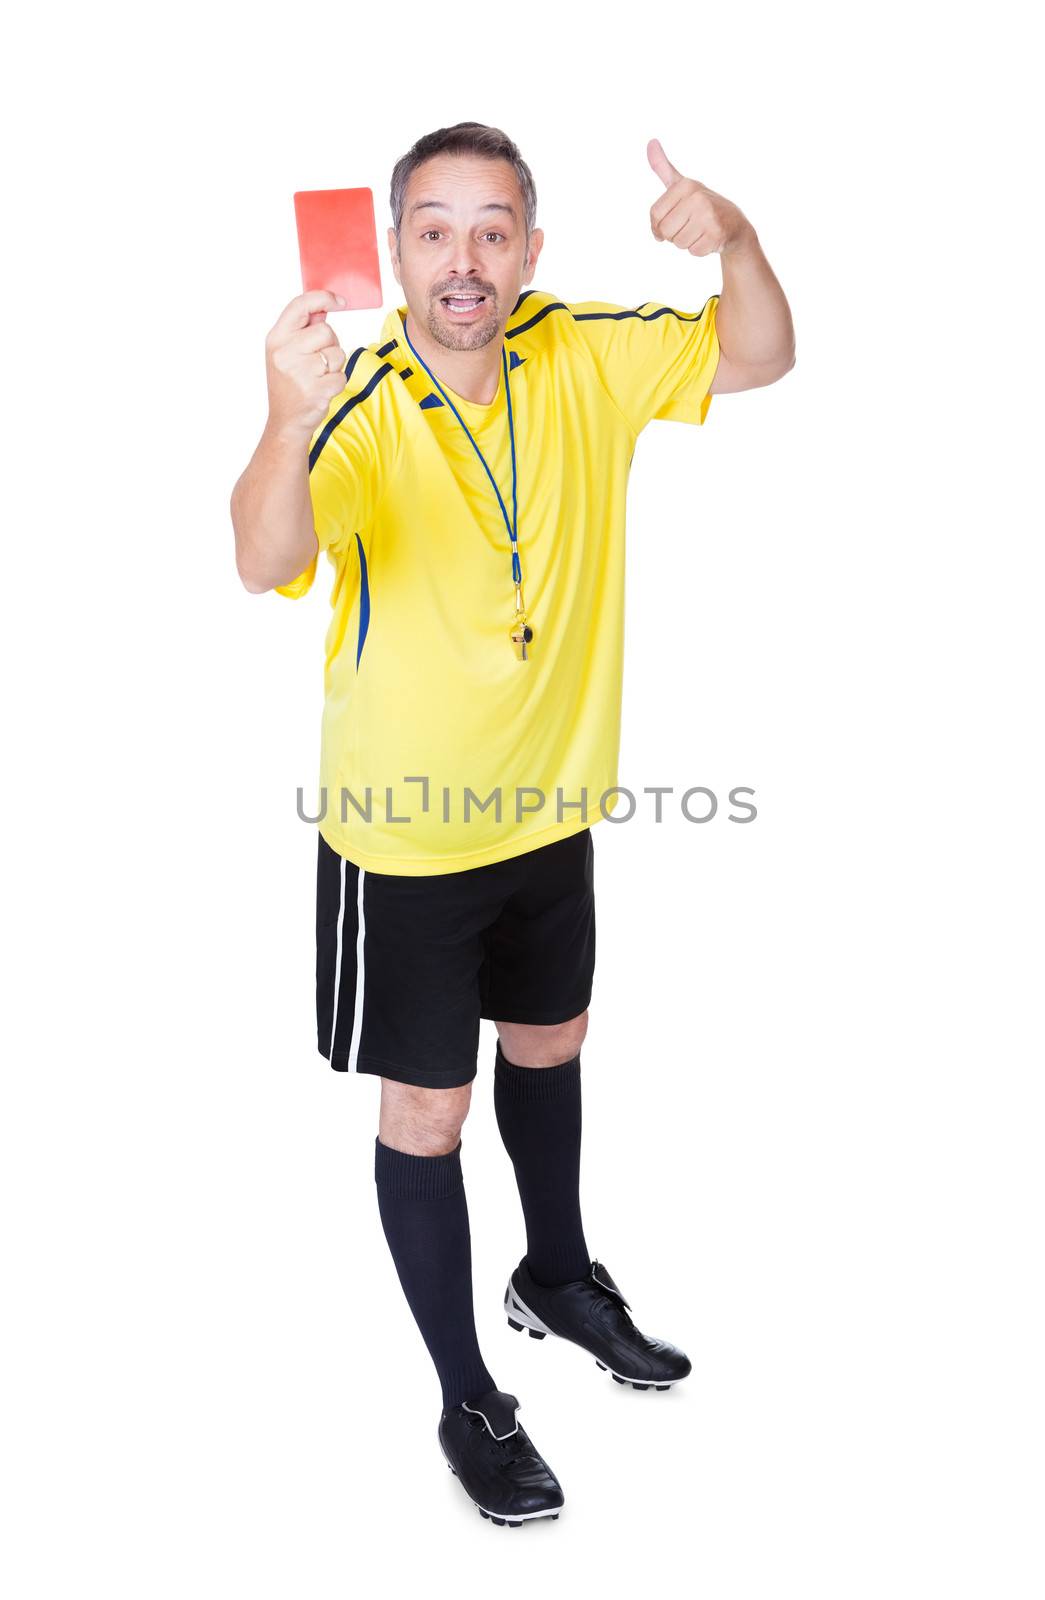 Soccer Referee Showing Red Card On White Background